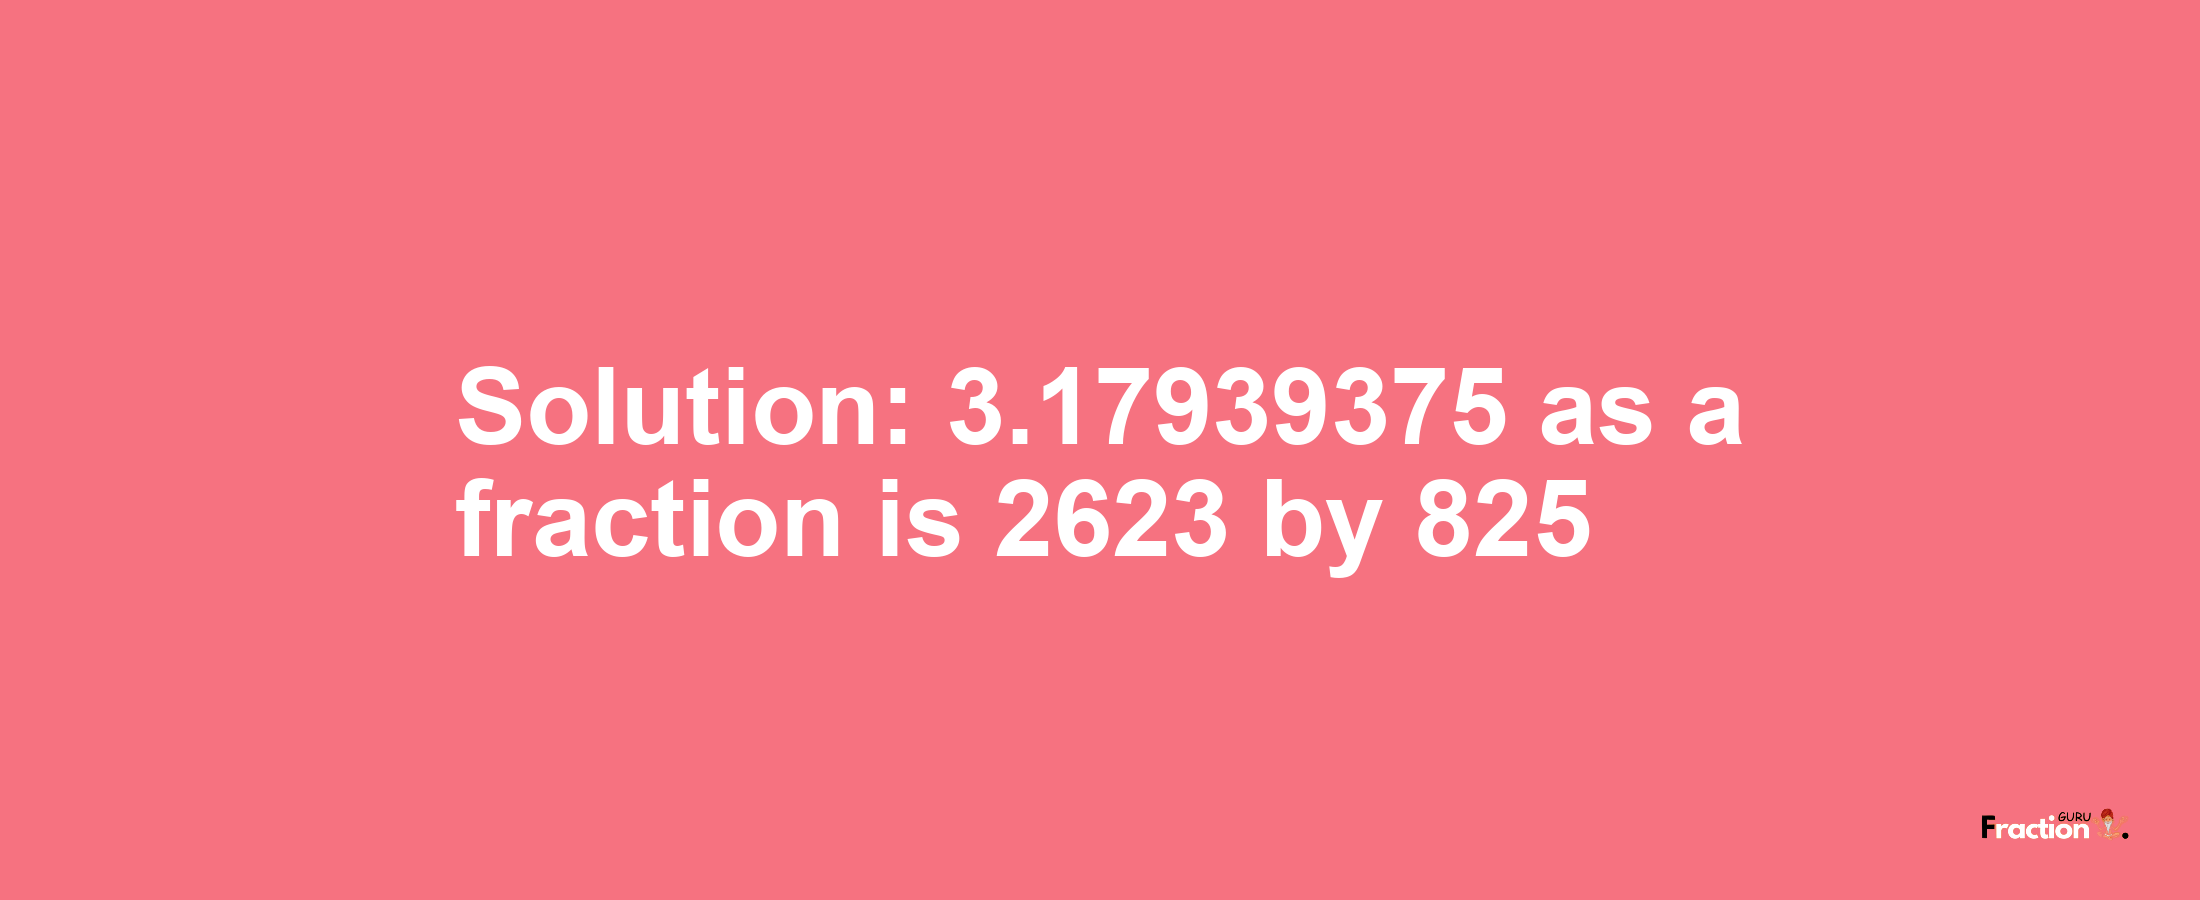 Solution:3.17939375 as a fraction is 2623/825